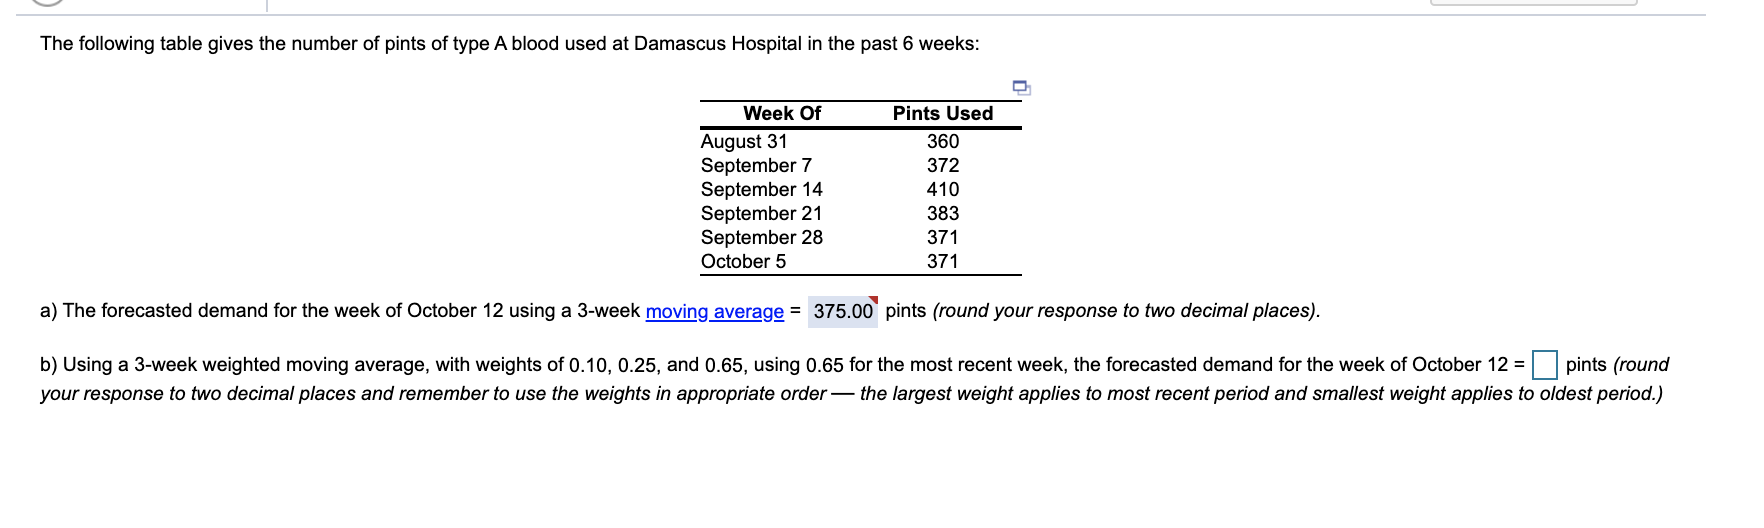 The following table gives the number of pints of type A blood used at Damascus Hospital in the past 6 weeks:
Week Of
Pints Used
August 31
September 7
September 14
September 21
September 28
October 5
360
372
410
383
371
371
a) The forecasted demand for the week of October 12 using a 3-week moving average = 375.00 pints (round your response to two decimal places).
b) Using a 3-week weighted moving average, with weights of 0.10, 0.25, and 0.65, using 0.65 for the most recent week, the forecasted demand for the week of October 12 =
pints (round
your response to two decimal places and remember to use the weights in appropriate order– the largest weight applies to most recent period and smallest weight applies to oldest period.)
